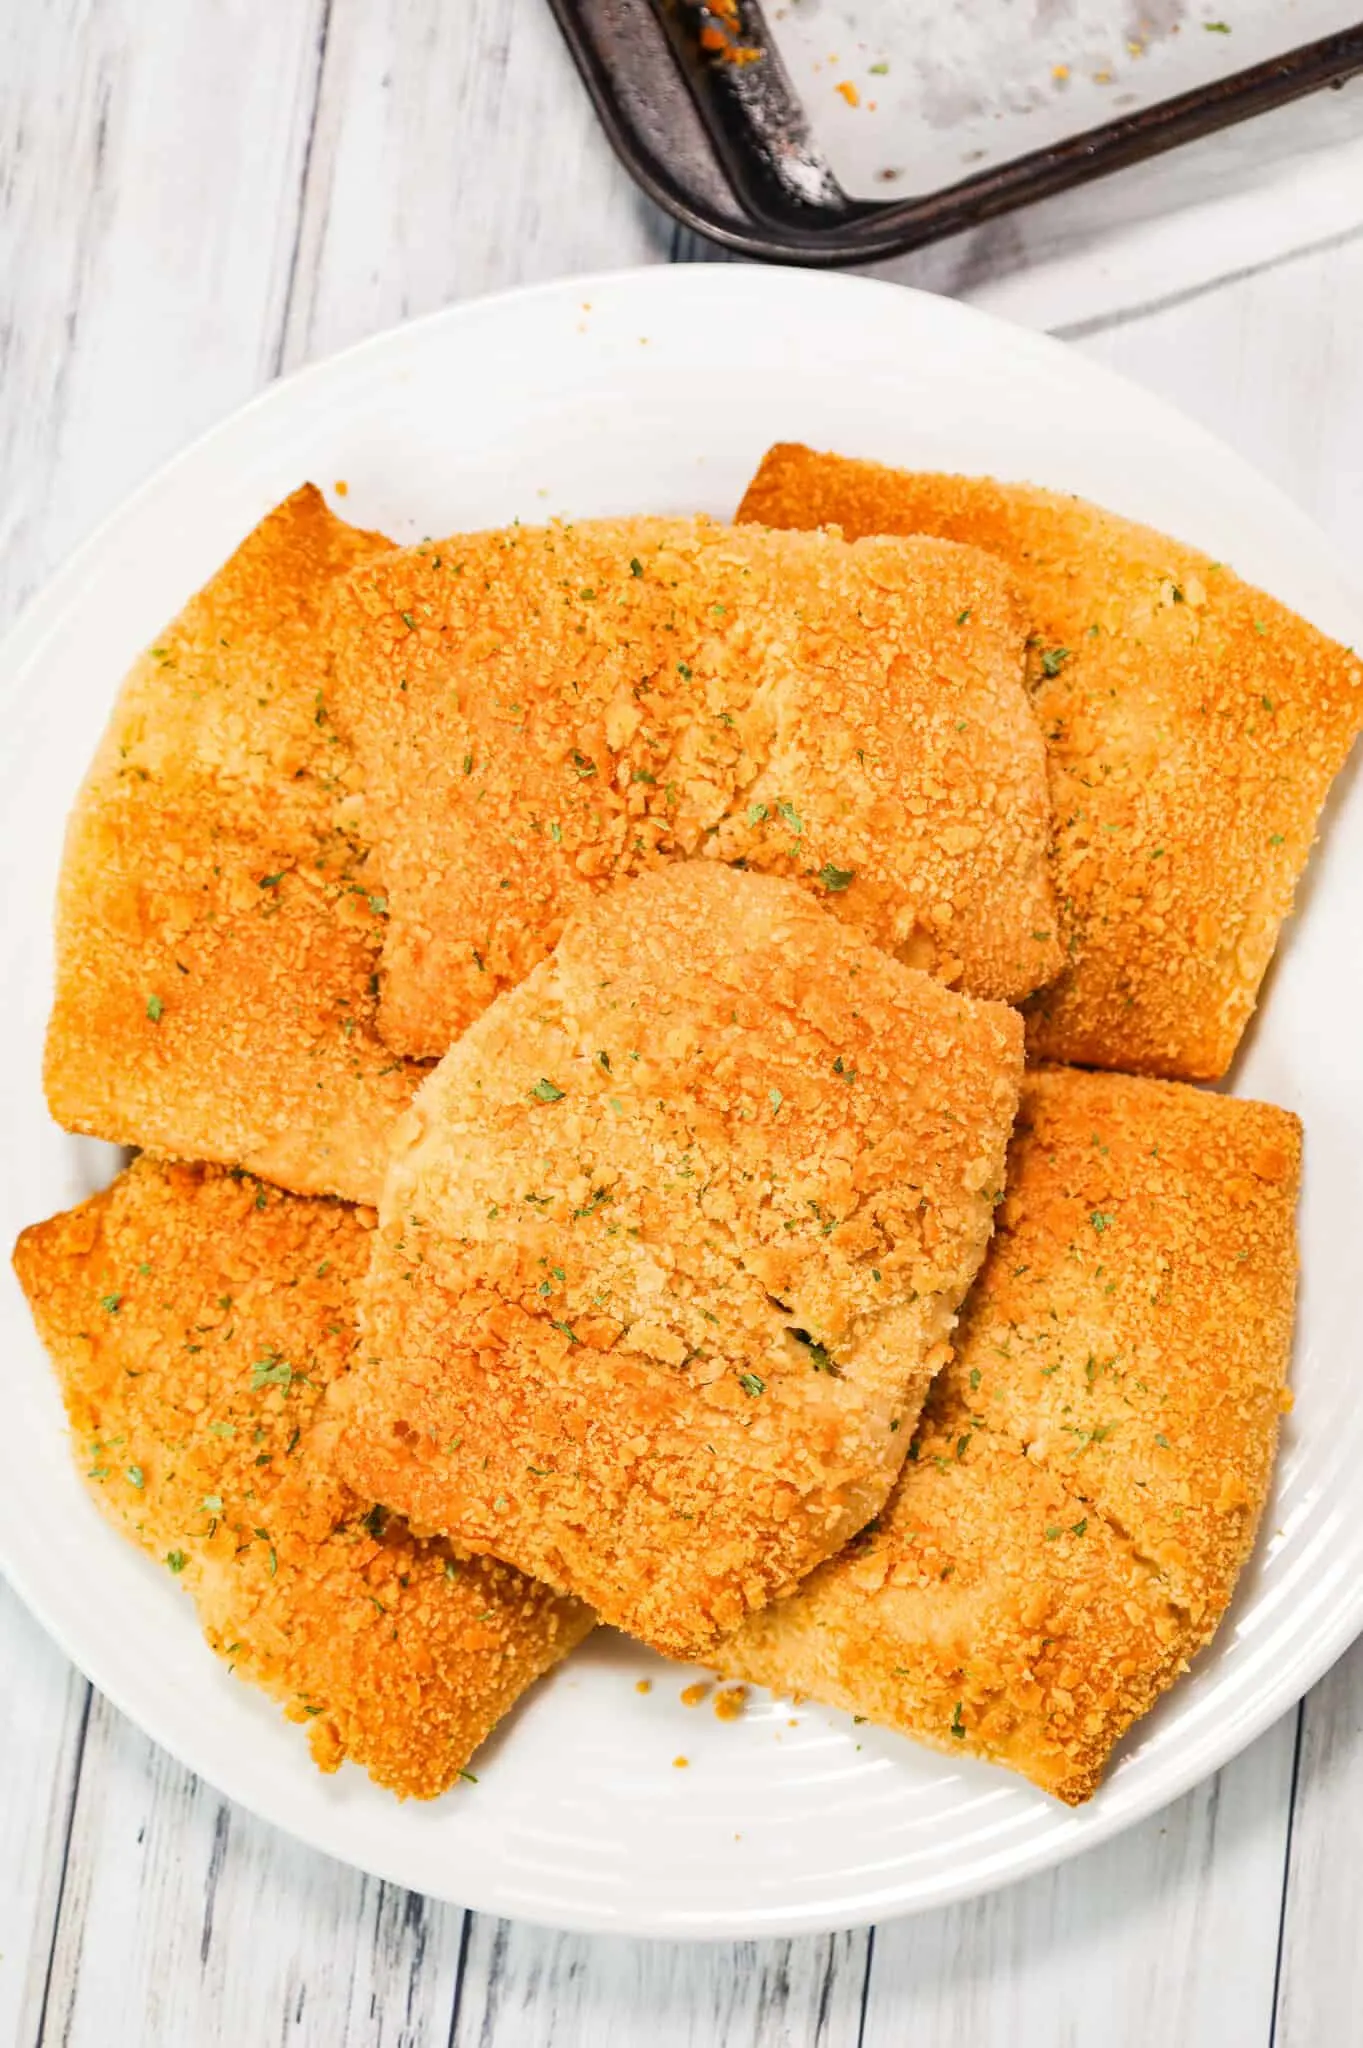 Chicken Pillows are an easy dinner recipe using rotisserie chicken mixed with cream cheese, mayo, Italian seasoning, shredded cheese and green onions all baked inside Pillsbury crescent dough topped with buttery Ritz crumbs.